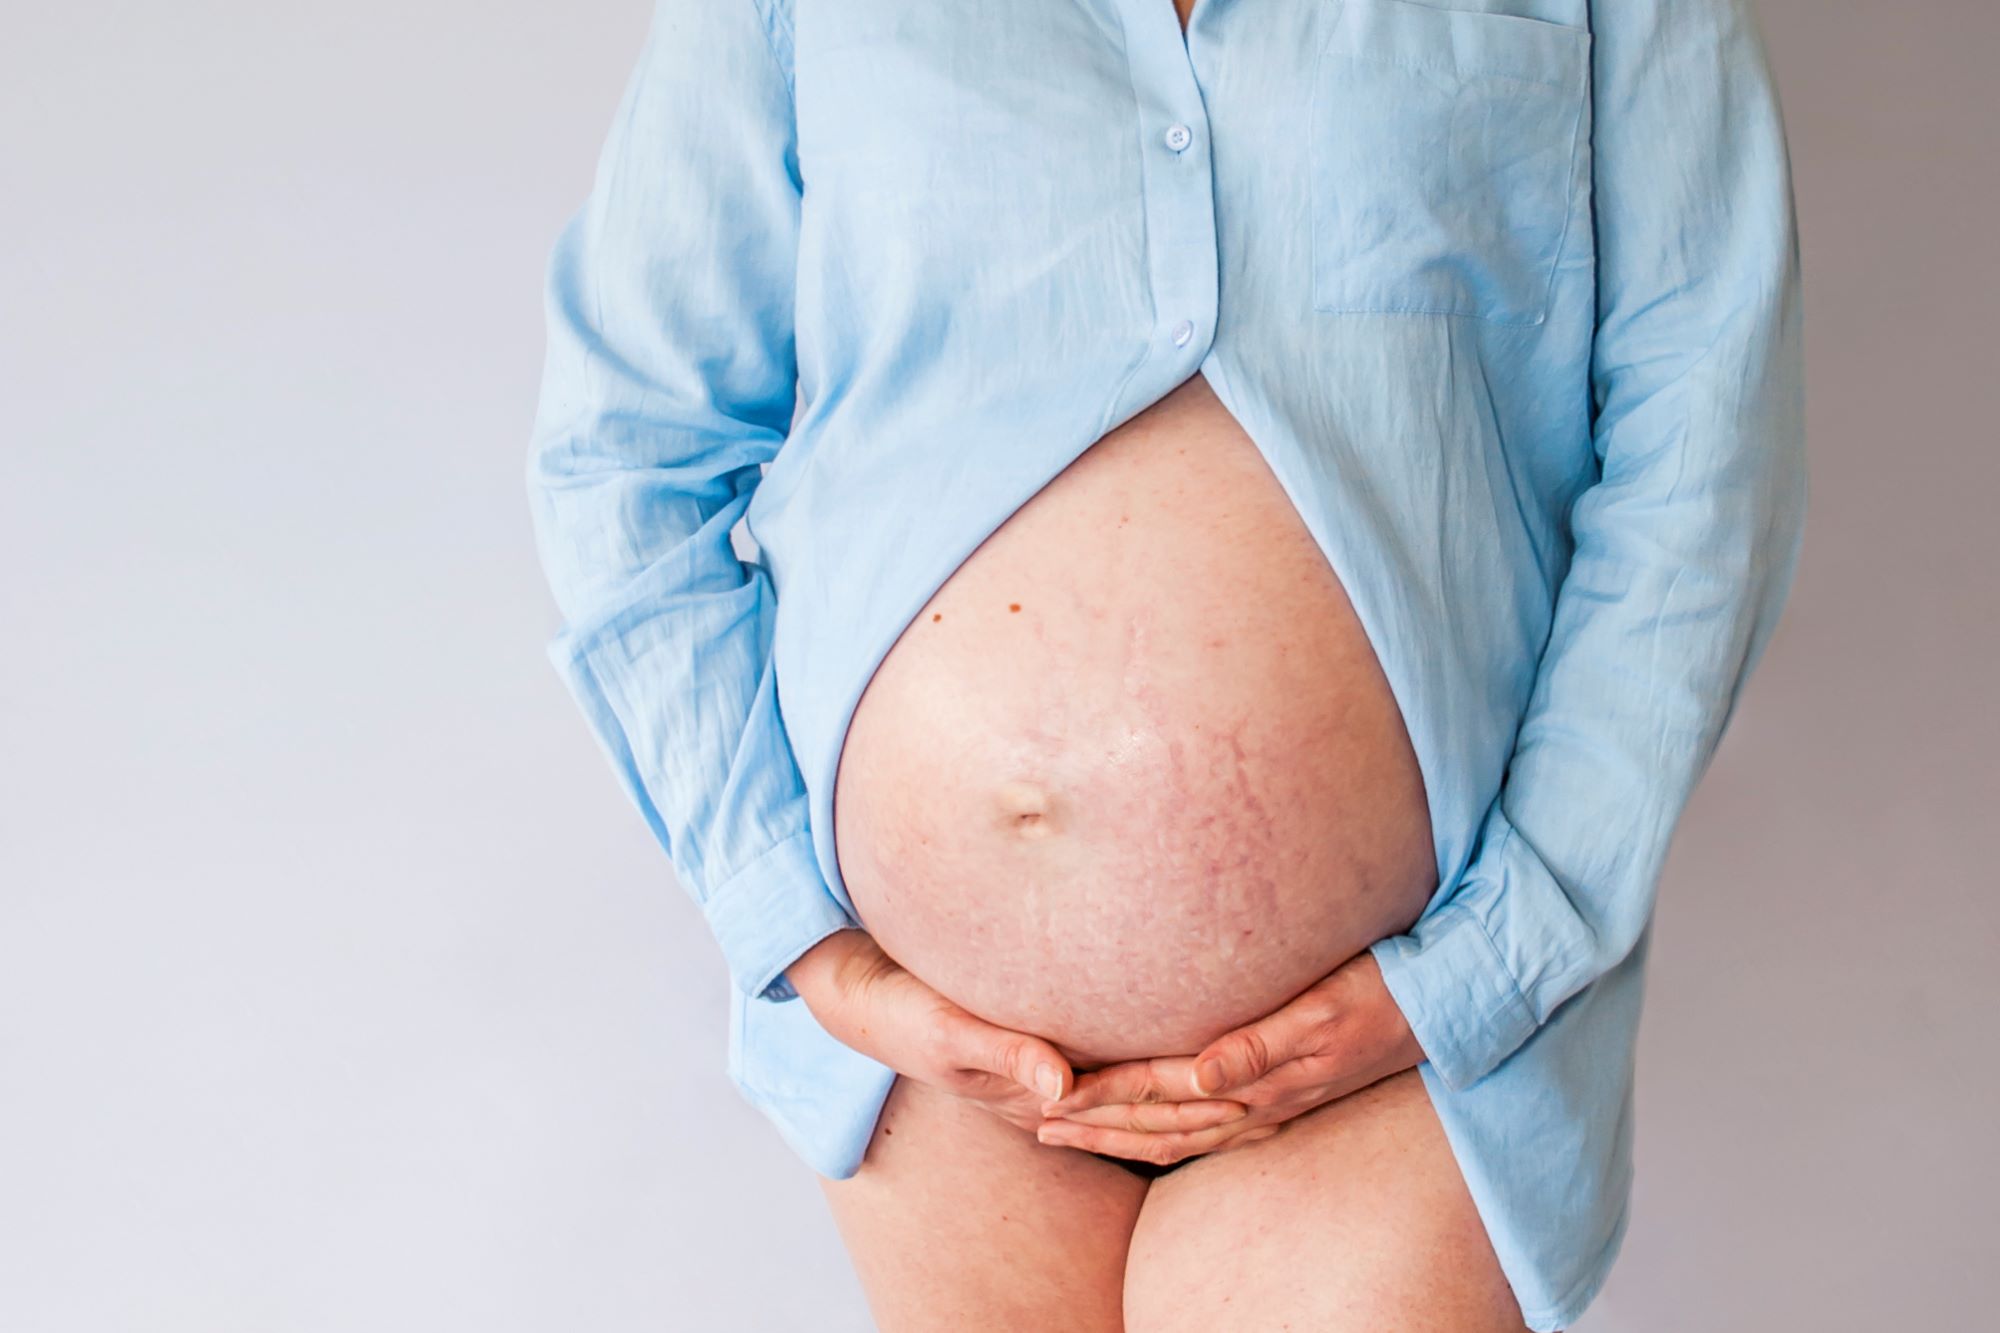 A mother to be  wears a blue shirt and cradles her bump straight on to the camera, her shirt is unbuttoned to show her bump fully